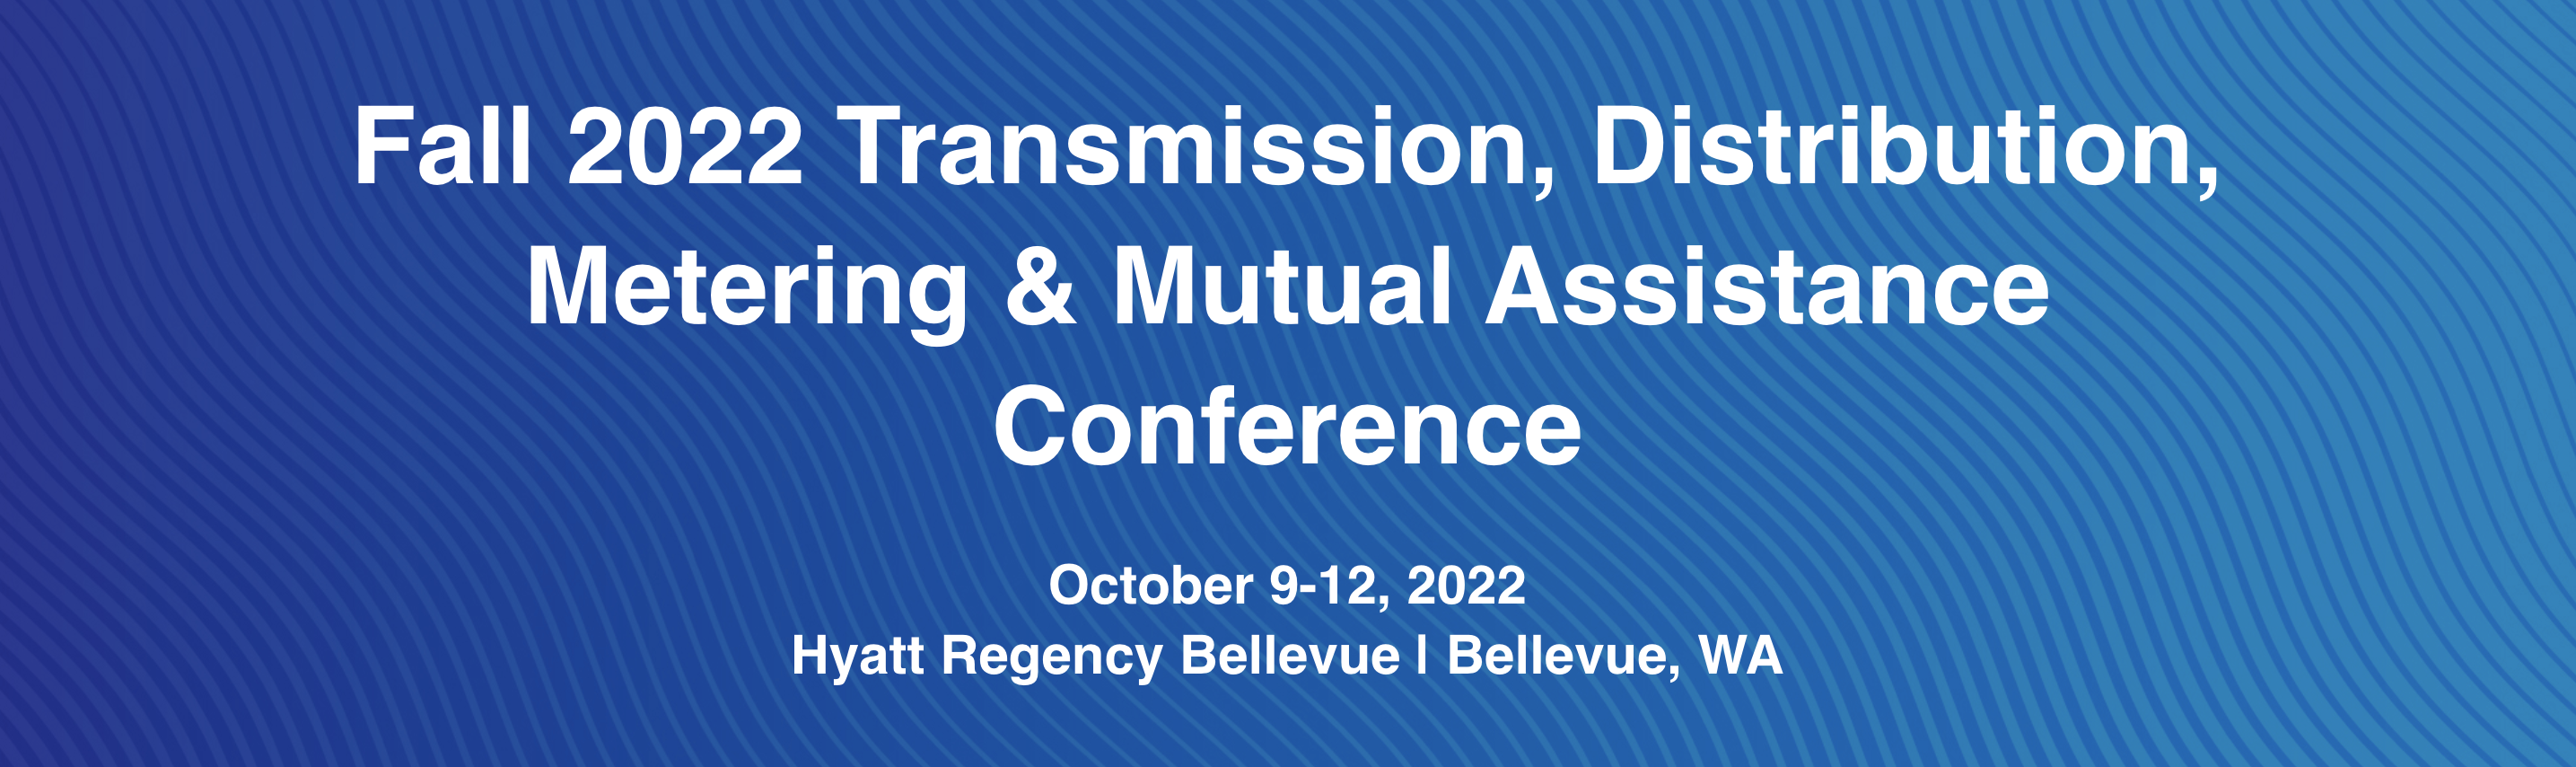 EEI Fall Transmission, Distribution & Metering Conference 2022